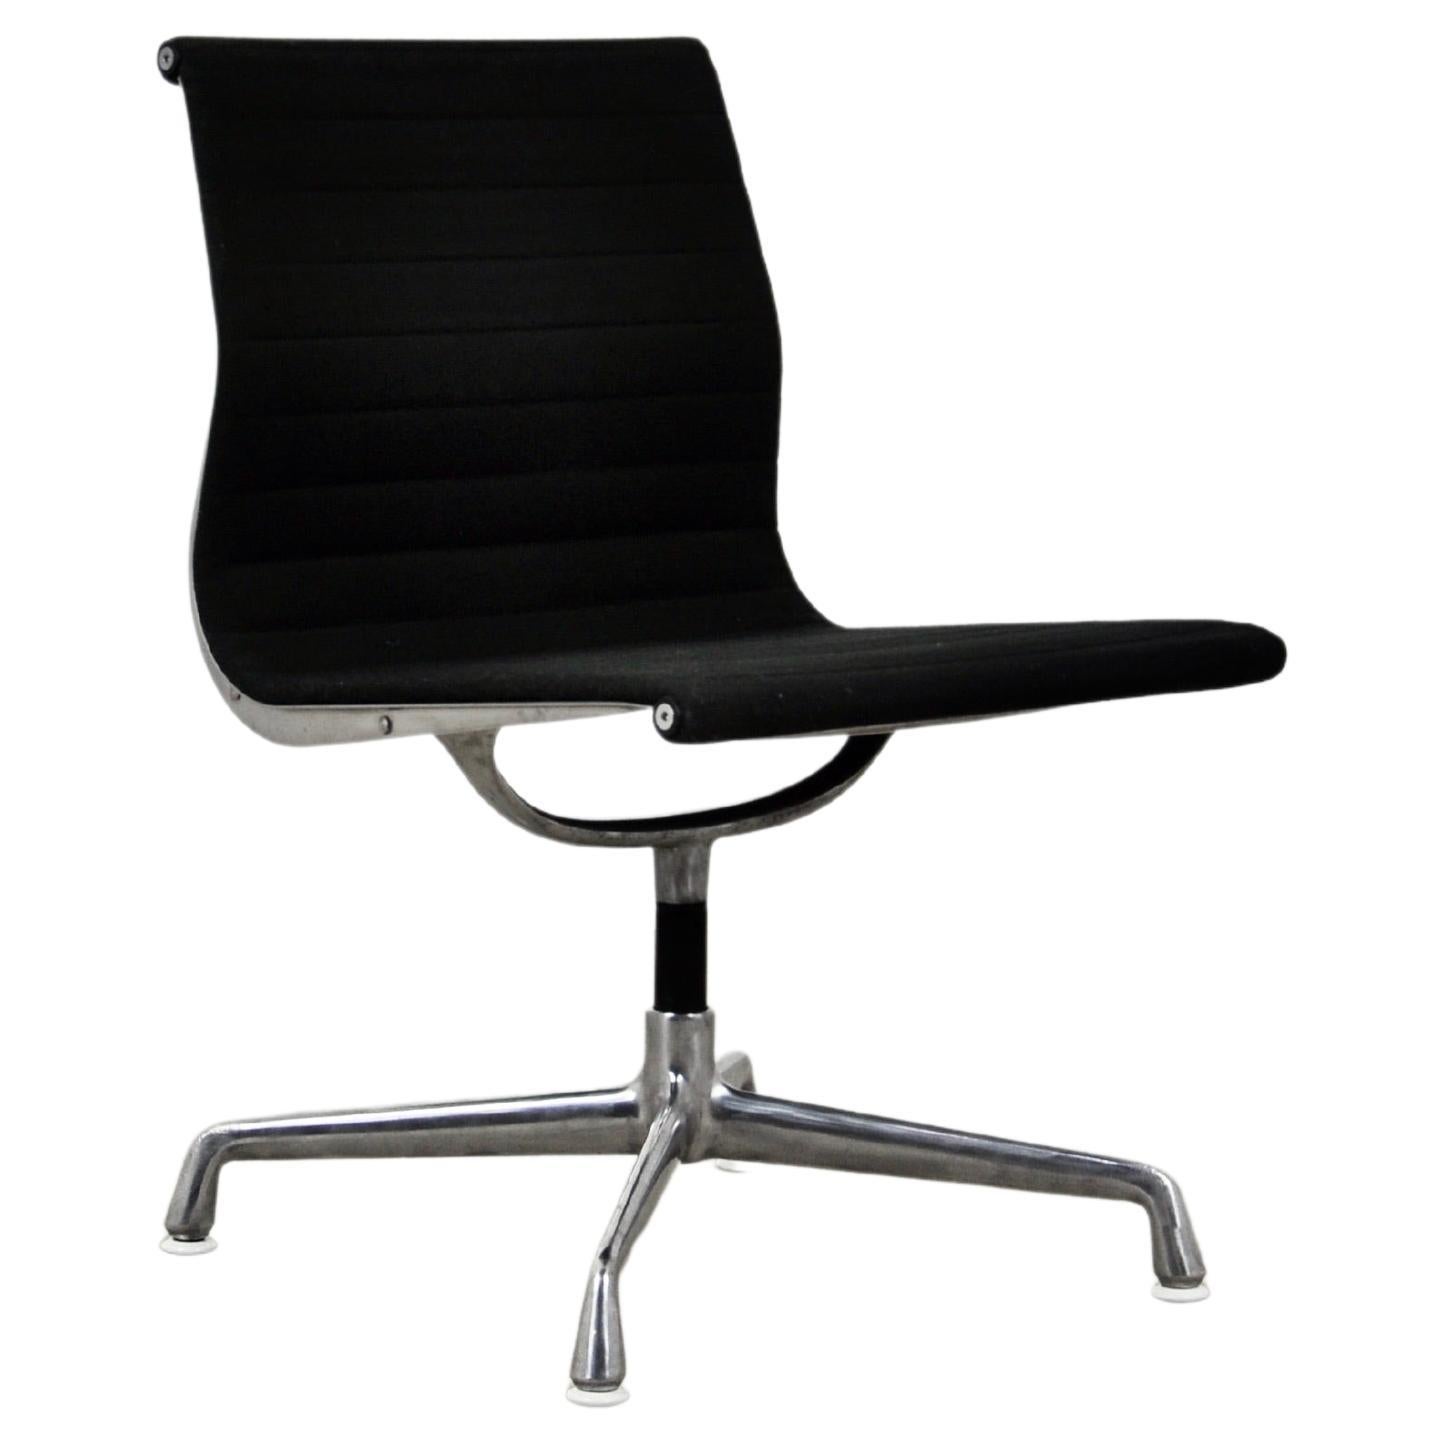 Black Office chair by Charles &Ray Eames for Herman Miller, 1960s